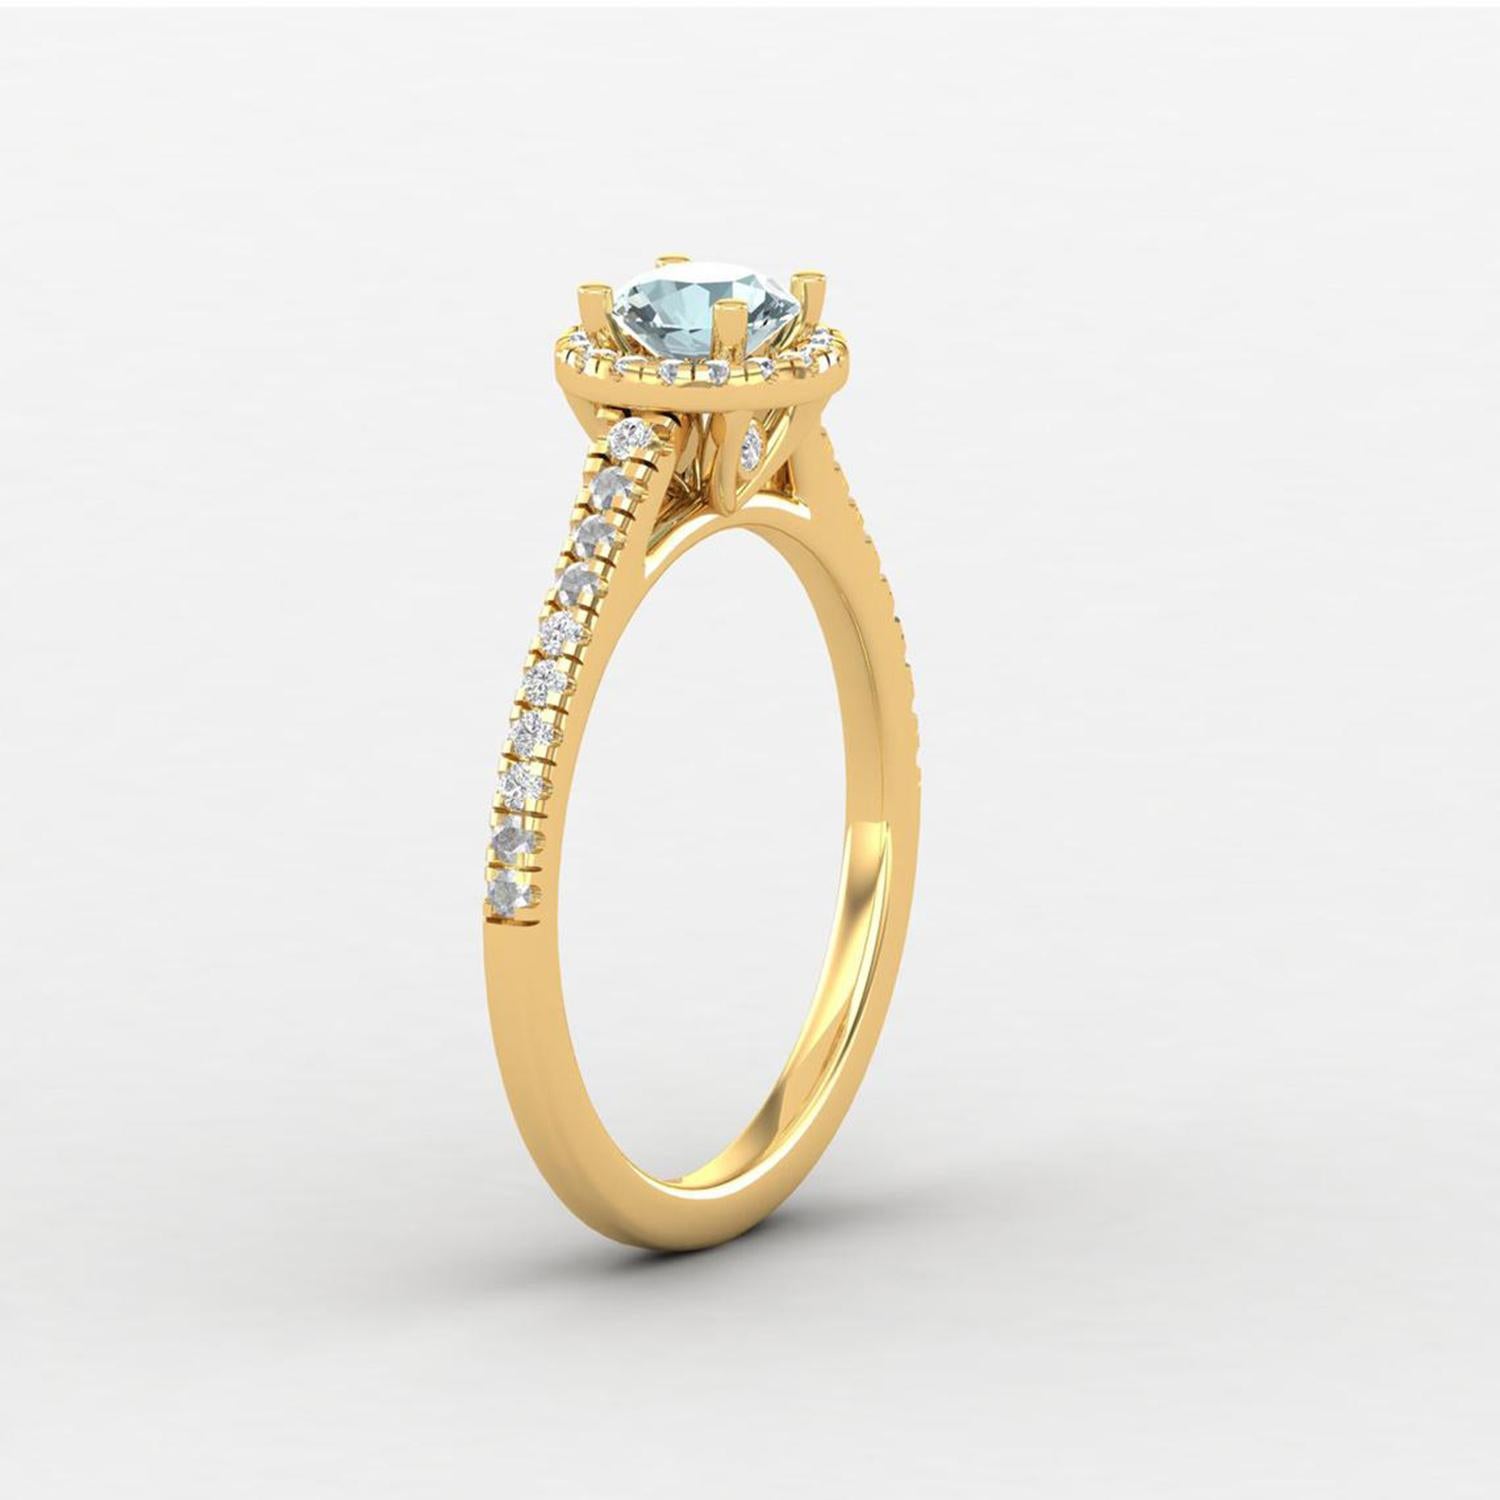 Women's 14 K Gold Aquamarine Ring / Diamond Solitaire Ring / Engagement Ring for Her For Sale